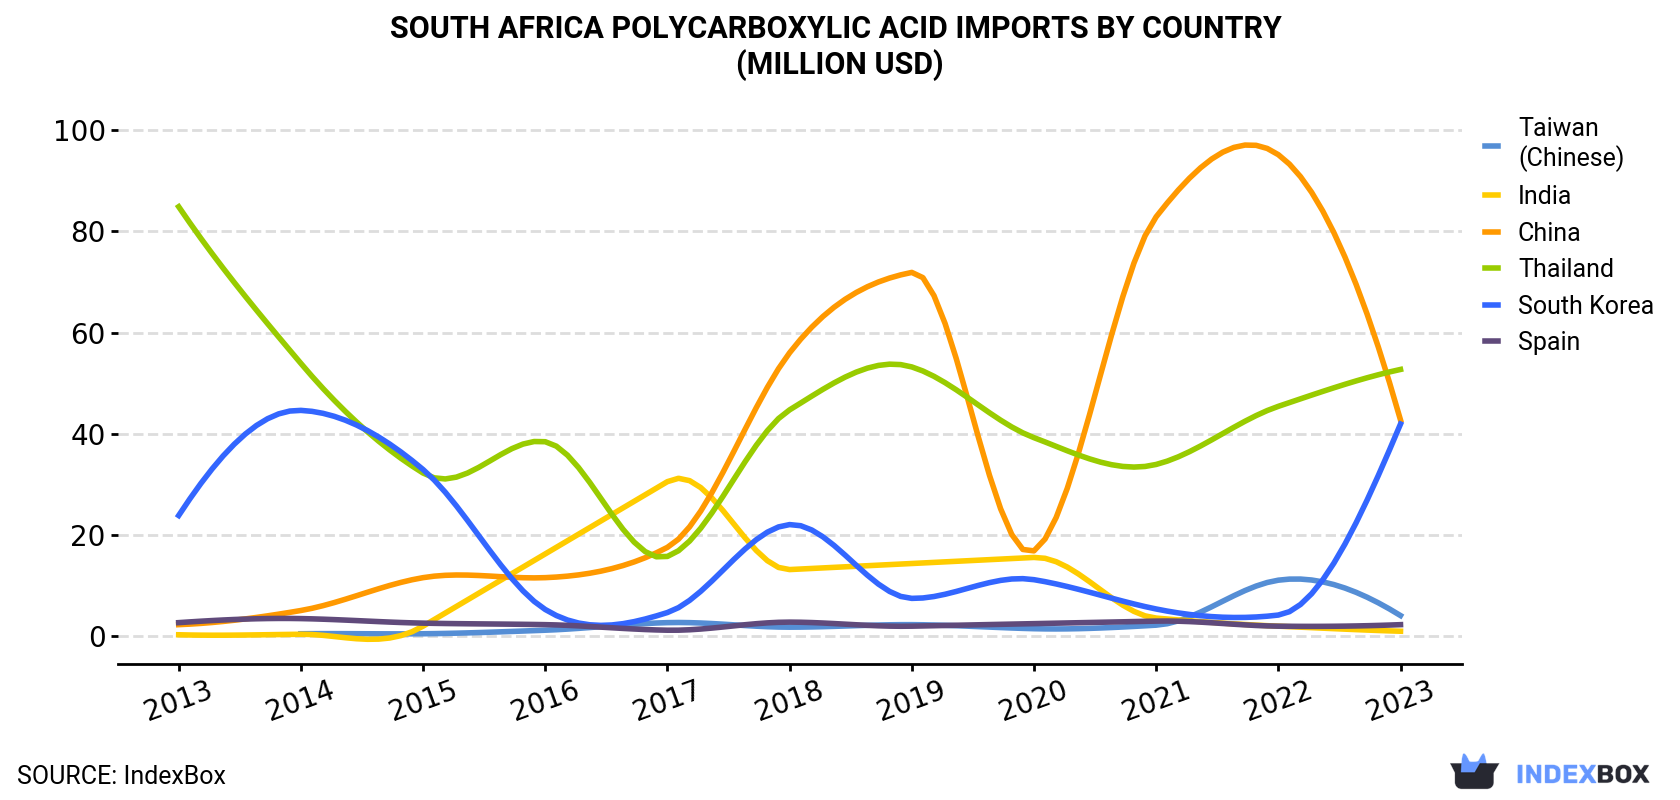 South Africa Polycarboxylic Acid Imports By Country (Million USD)